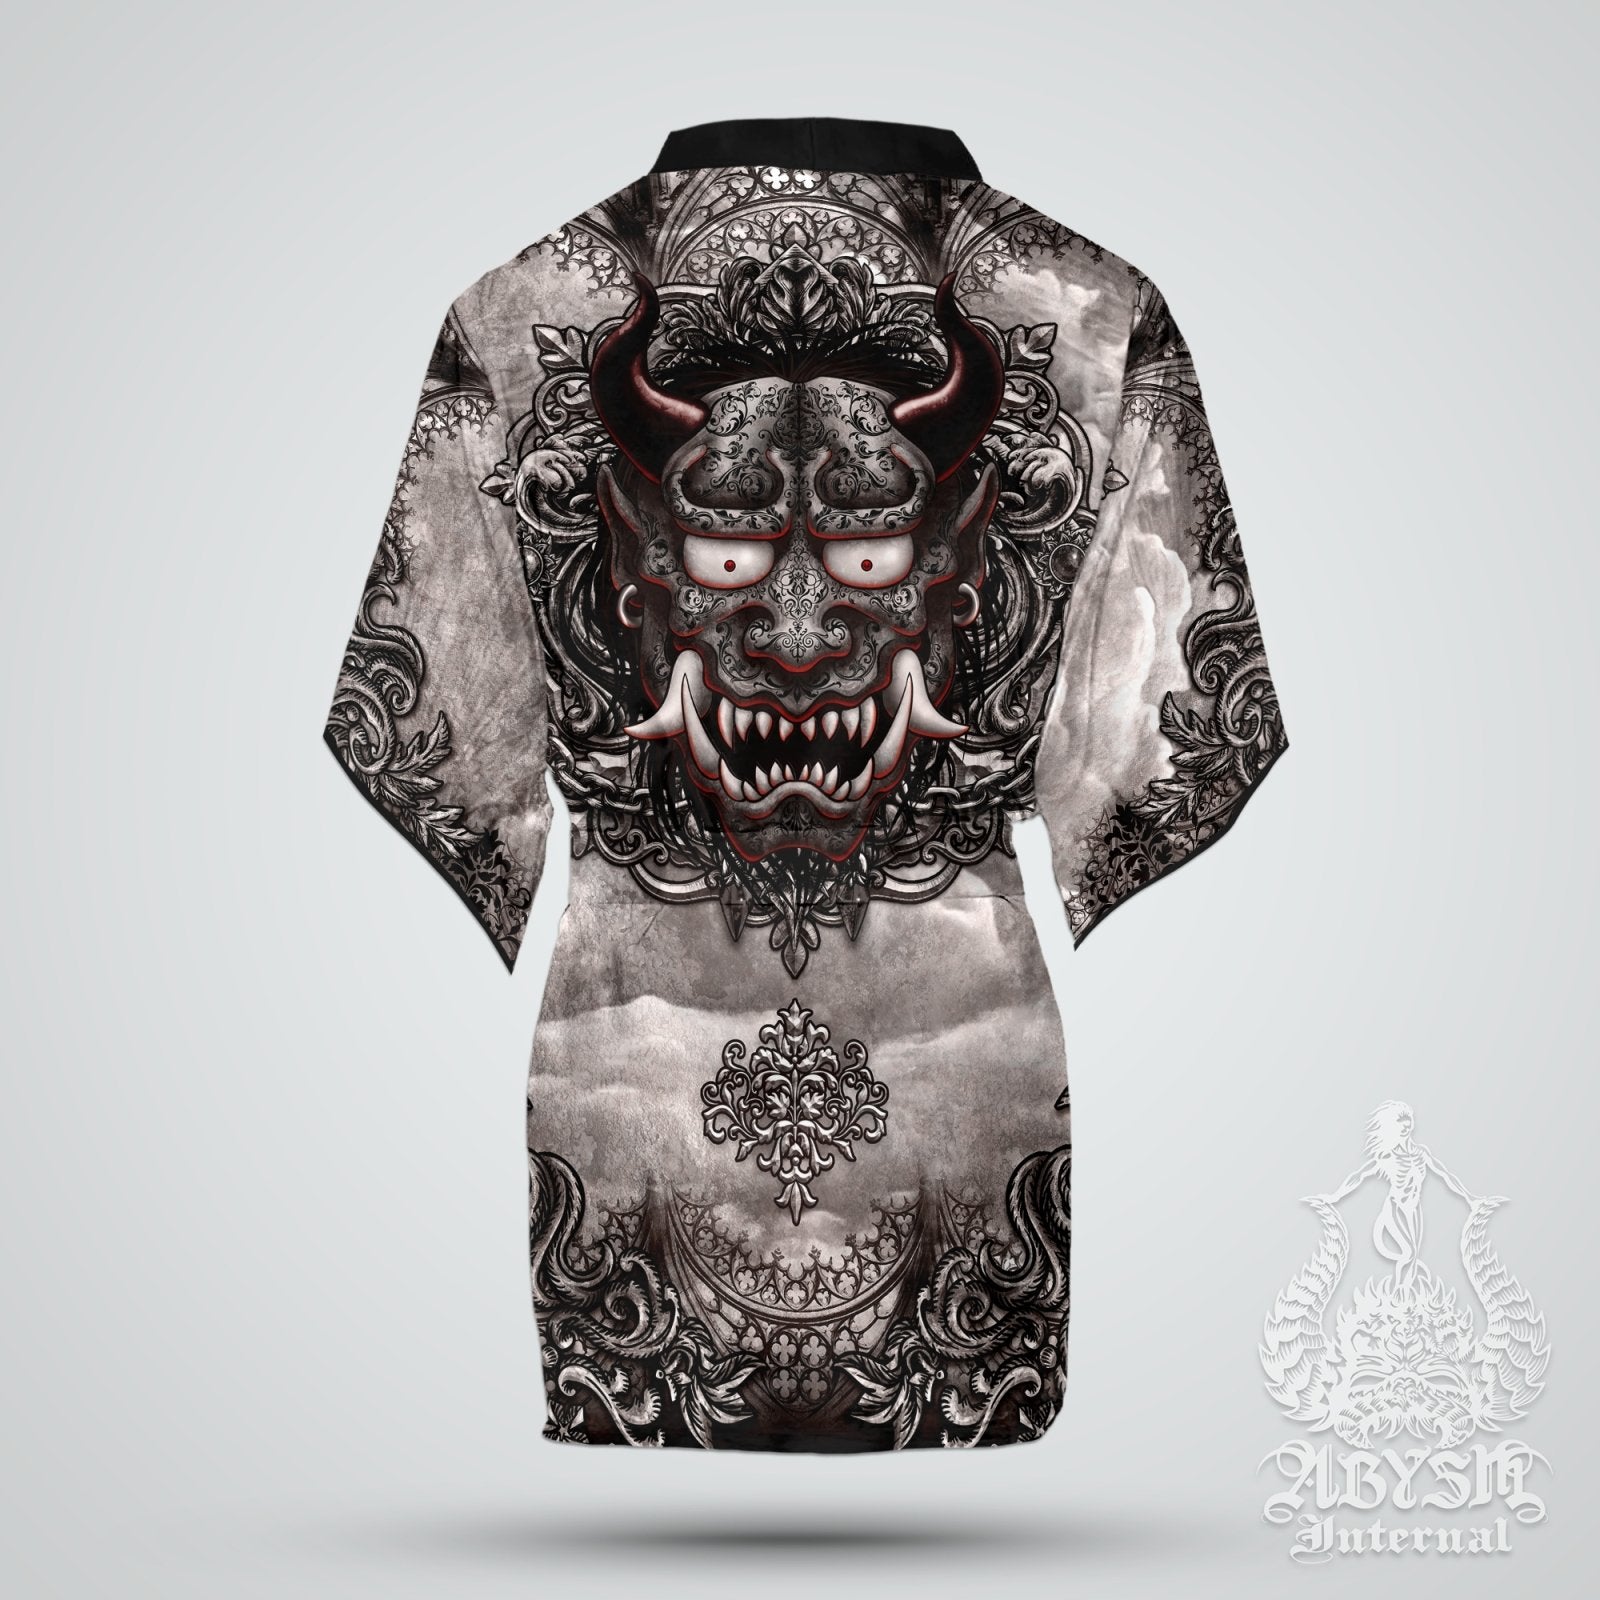 Demon Cover Up, Beach Outfit, Oni Party Kimono, Japanese Summer Festival Robe, Indie and Alternative Clothing, Unisex - Gothic Grey - Abysm Internal